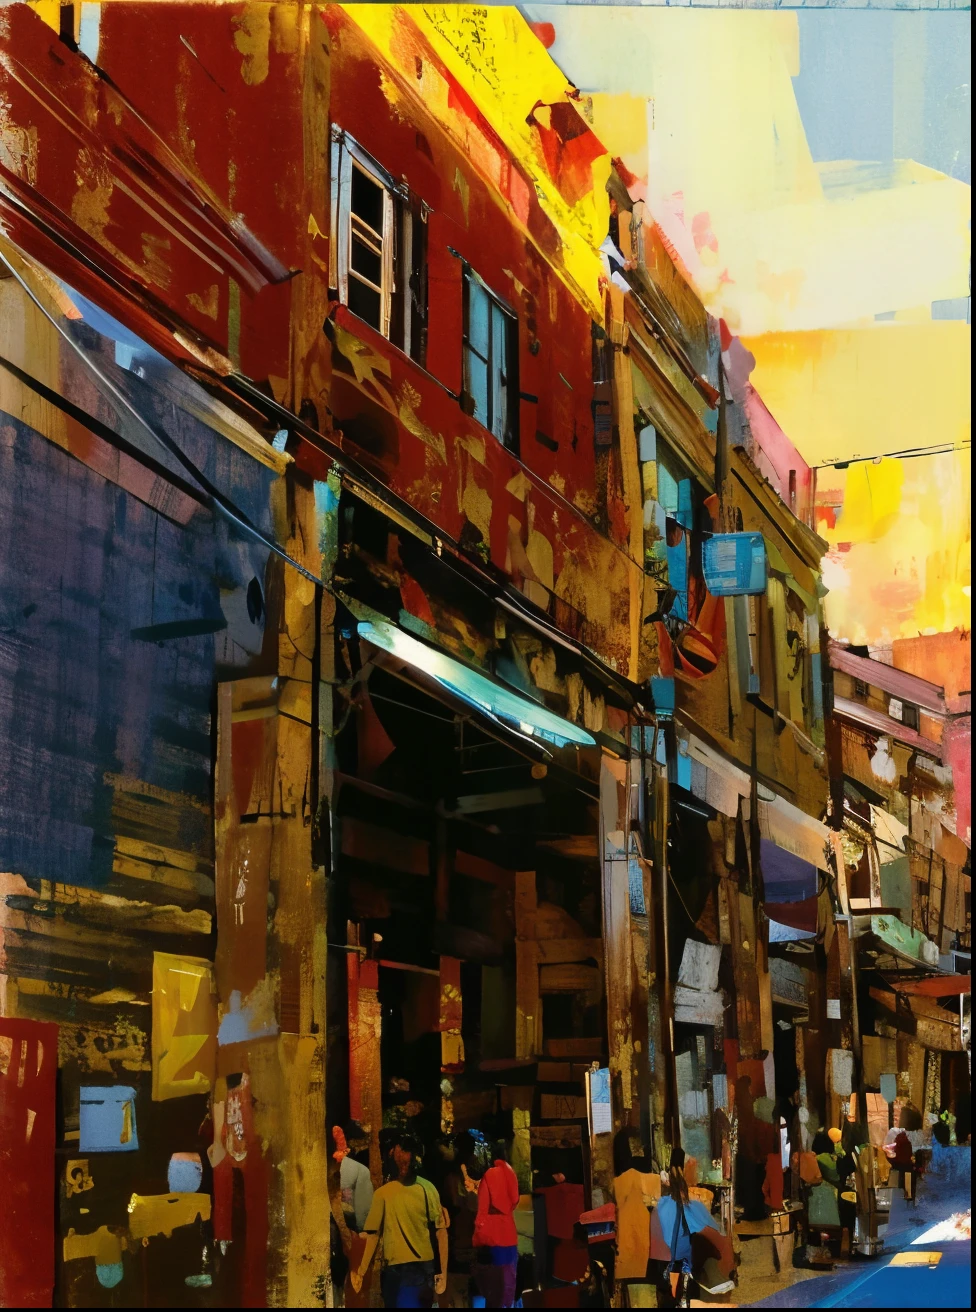 People walking on city streets with ancient buildings,Southeast Asia arcade, Ancient building, old shops, Building facades, rundown buildings, ancient buildings, exterior, seen from outside, Kowloon Walled City style, well worn, bigger, Chinatown, Sunnyday,Sunlit view from bottom